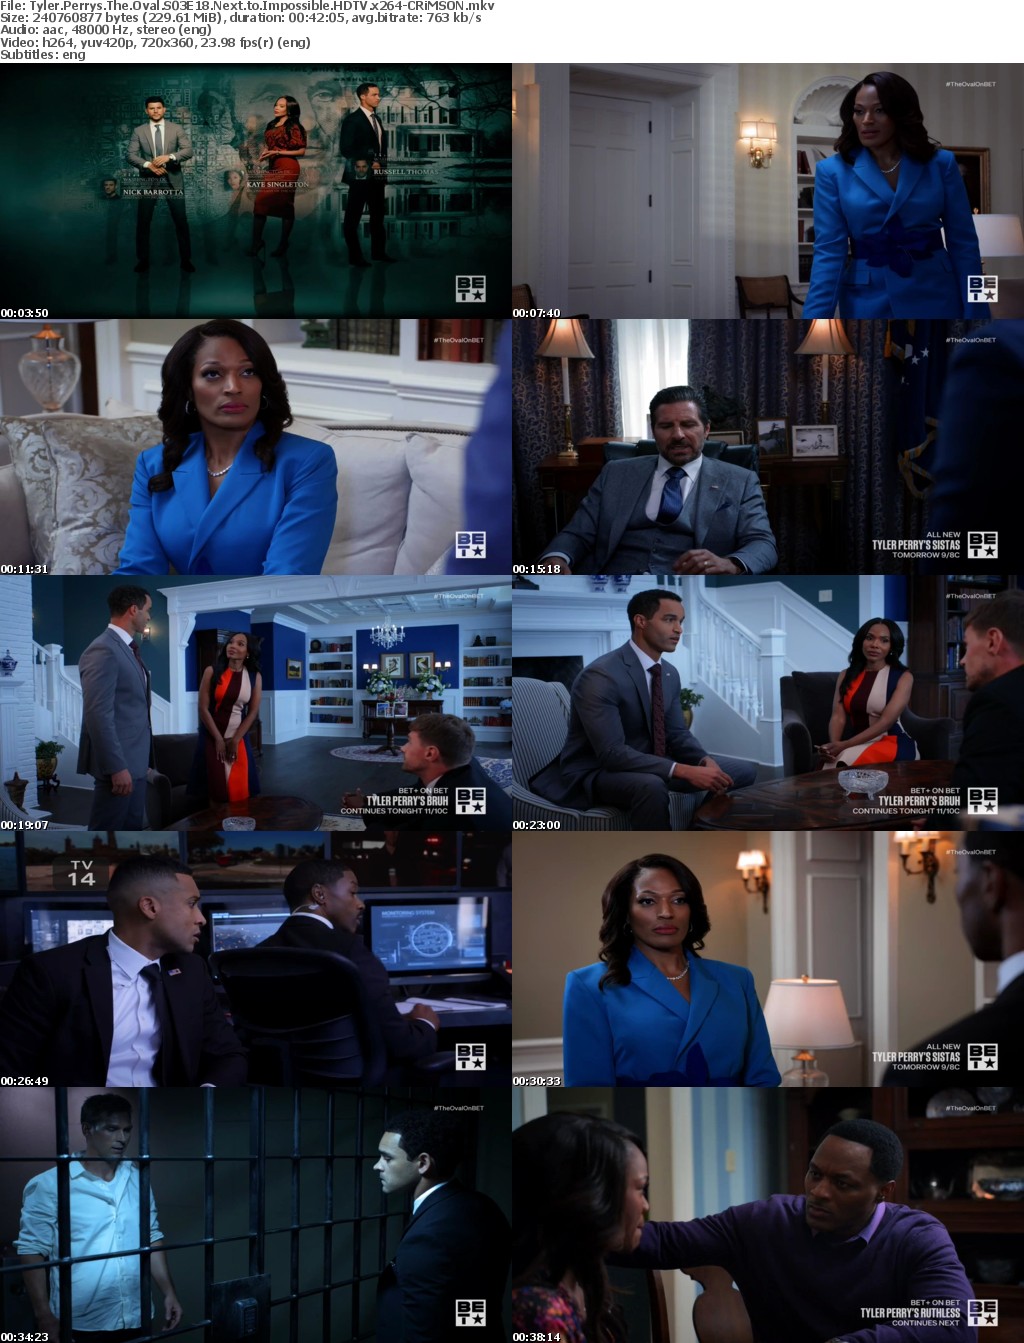 Tyler Perrys The Oval S03E18 Next to Impossible HDTV x264-CRiMSON